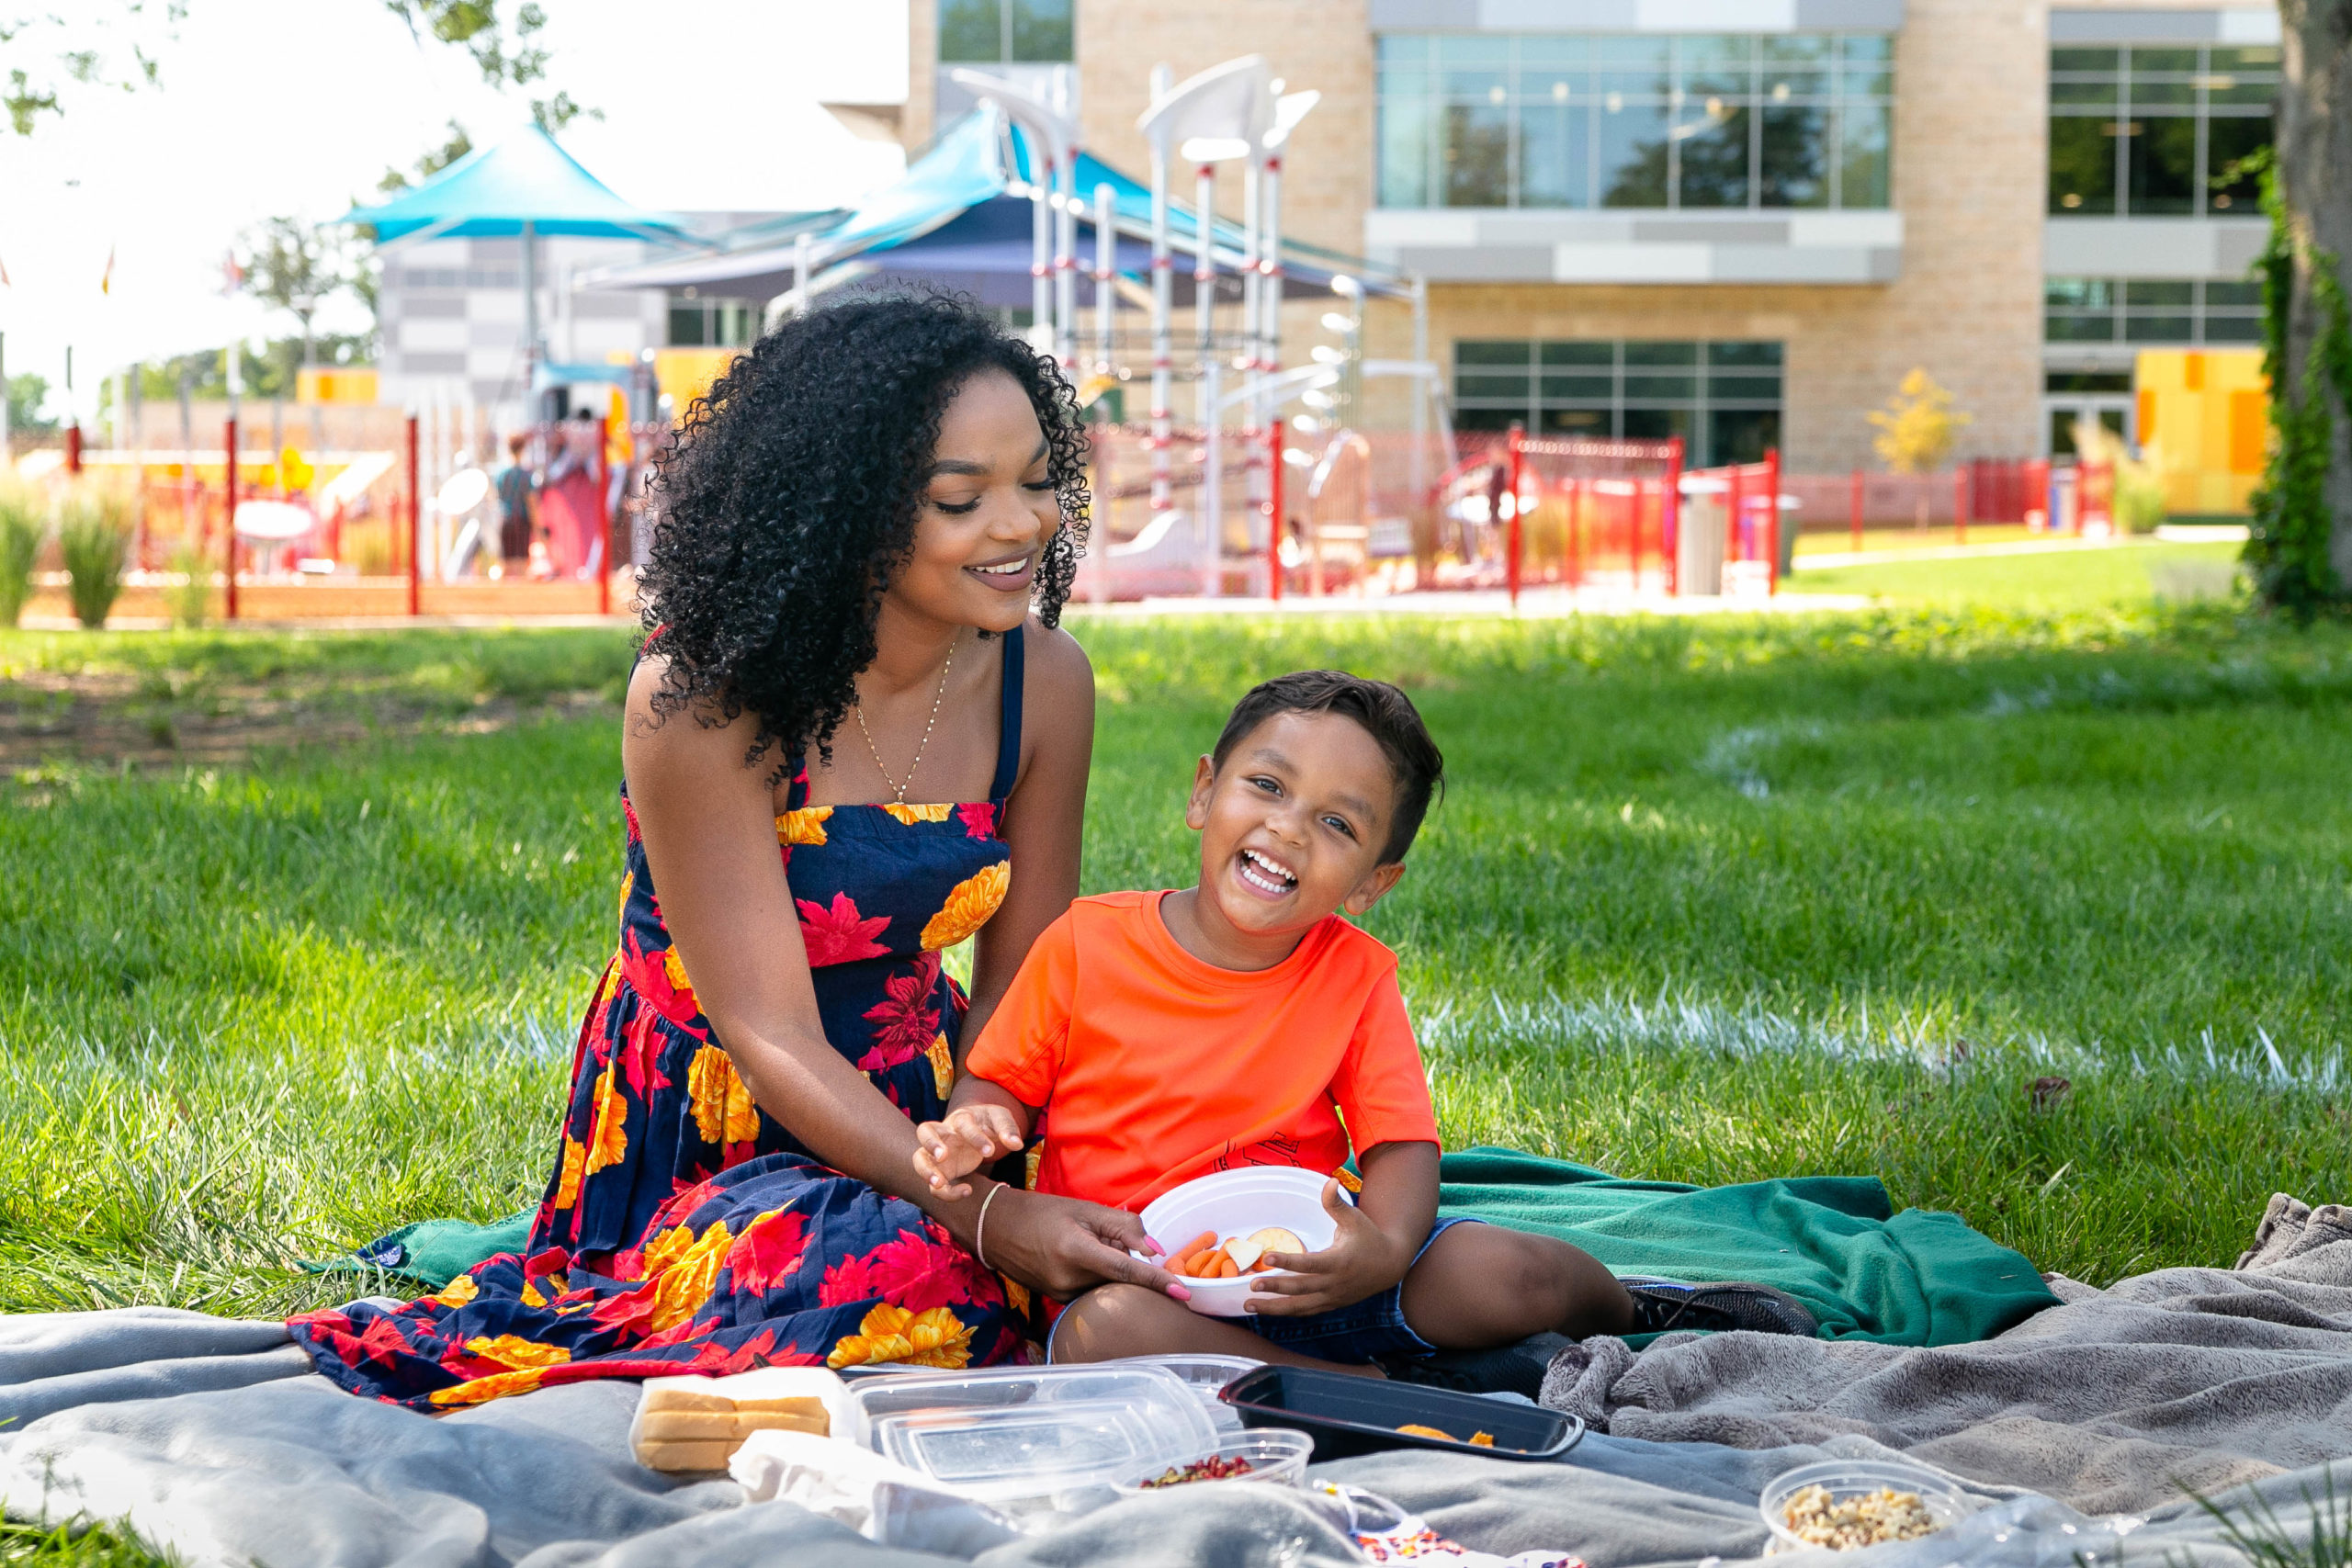 Mother and son smiling having a picnic on grass